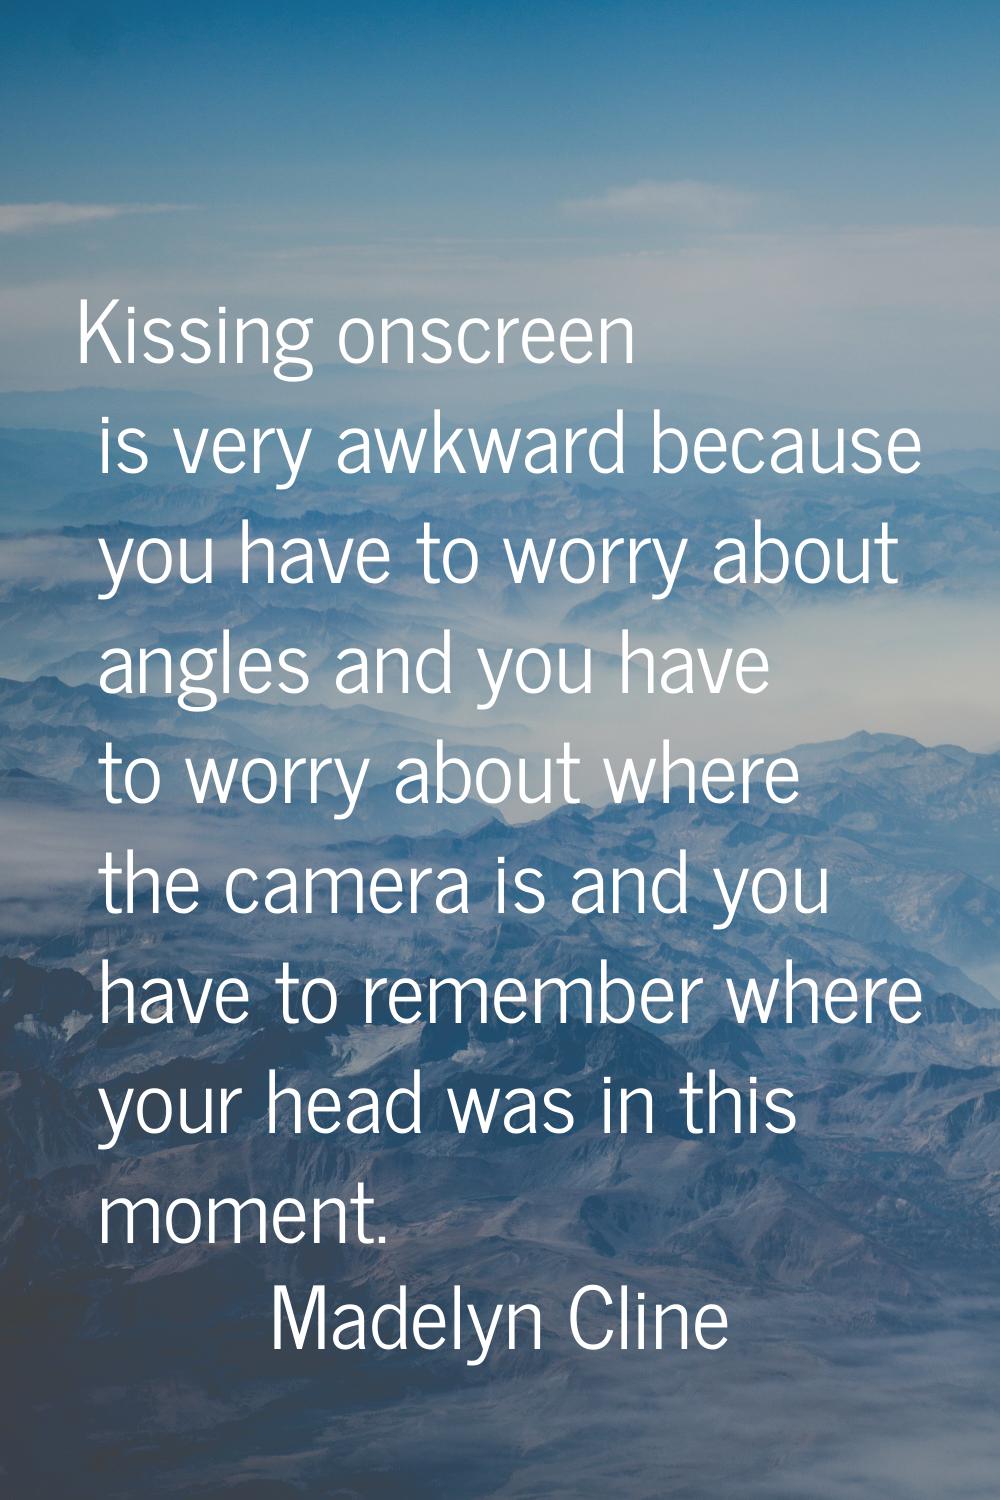 Kissing onscreen is very awkward because you have to worry about angles and you have to worry about